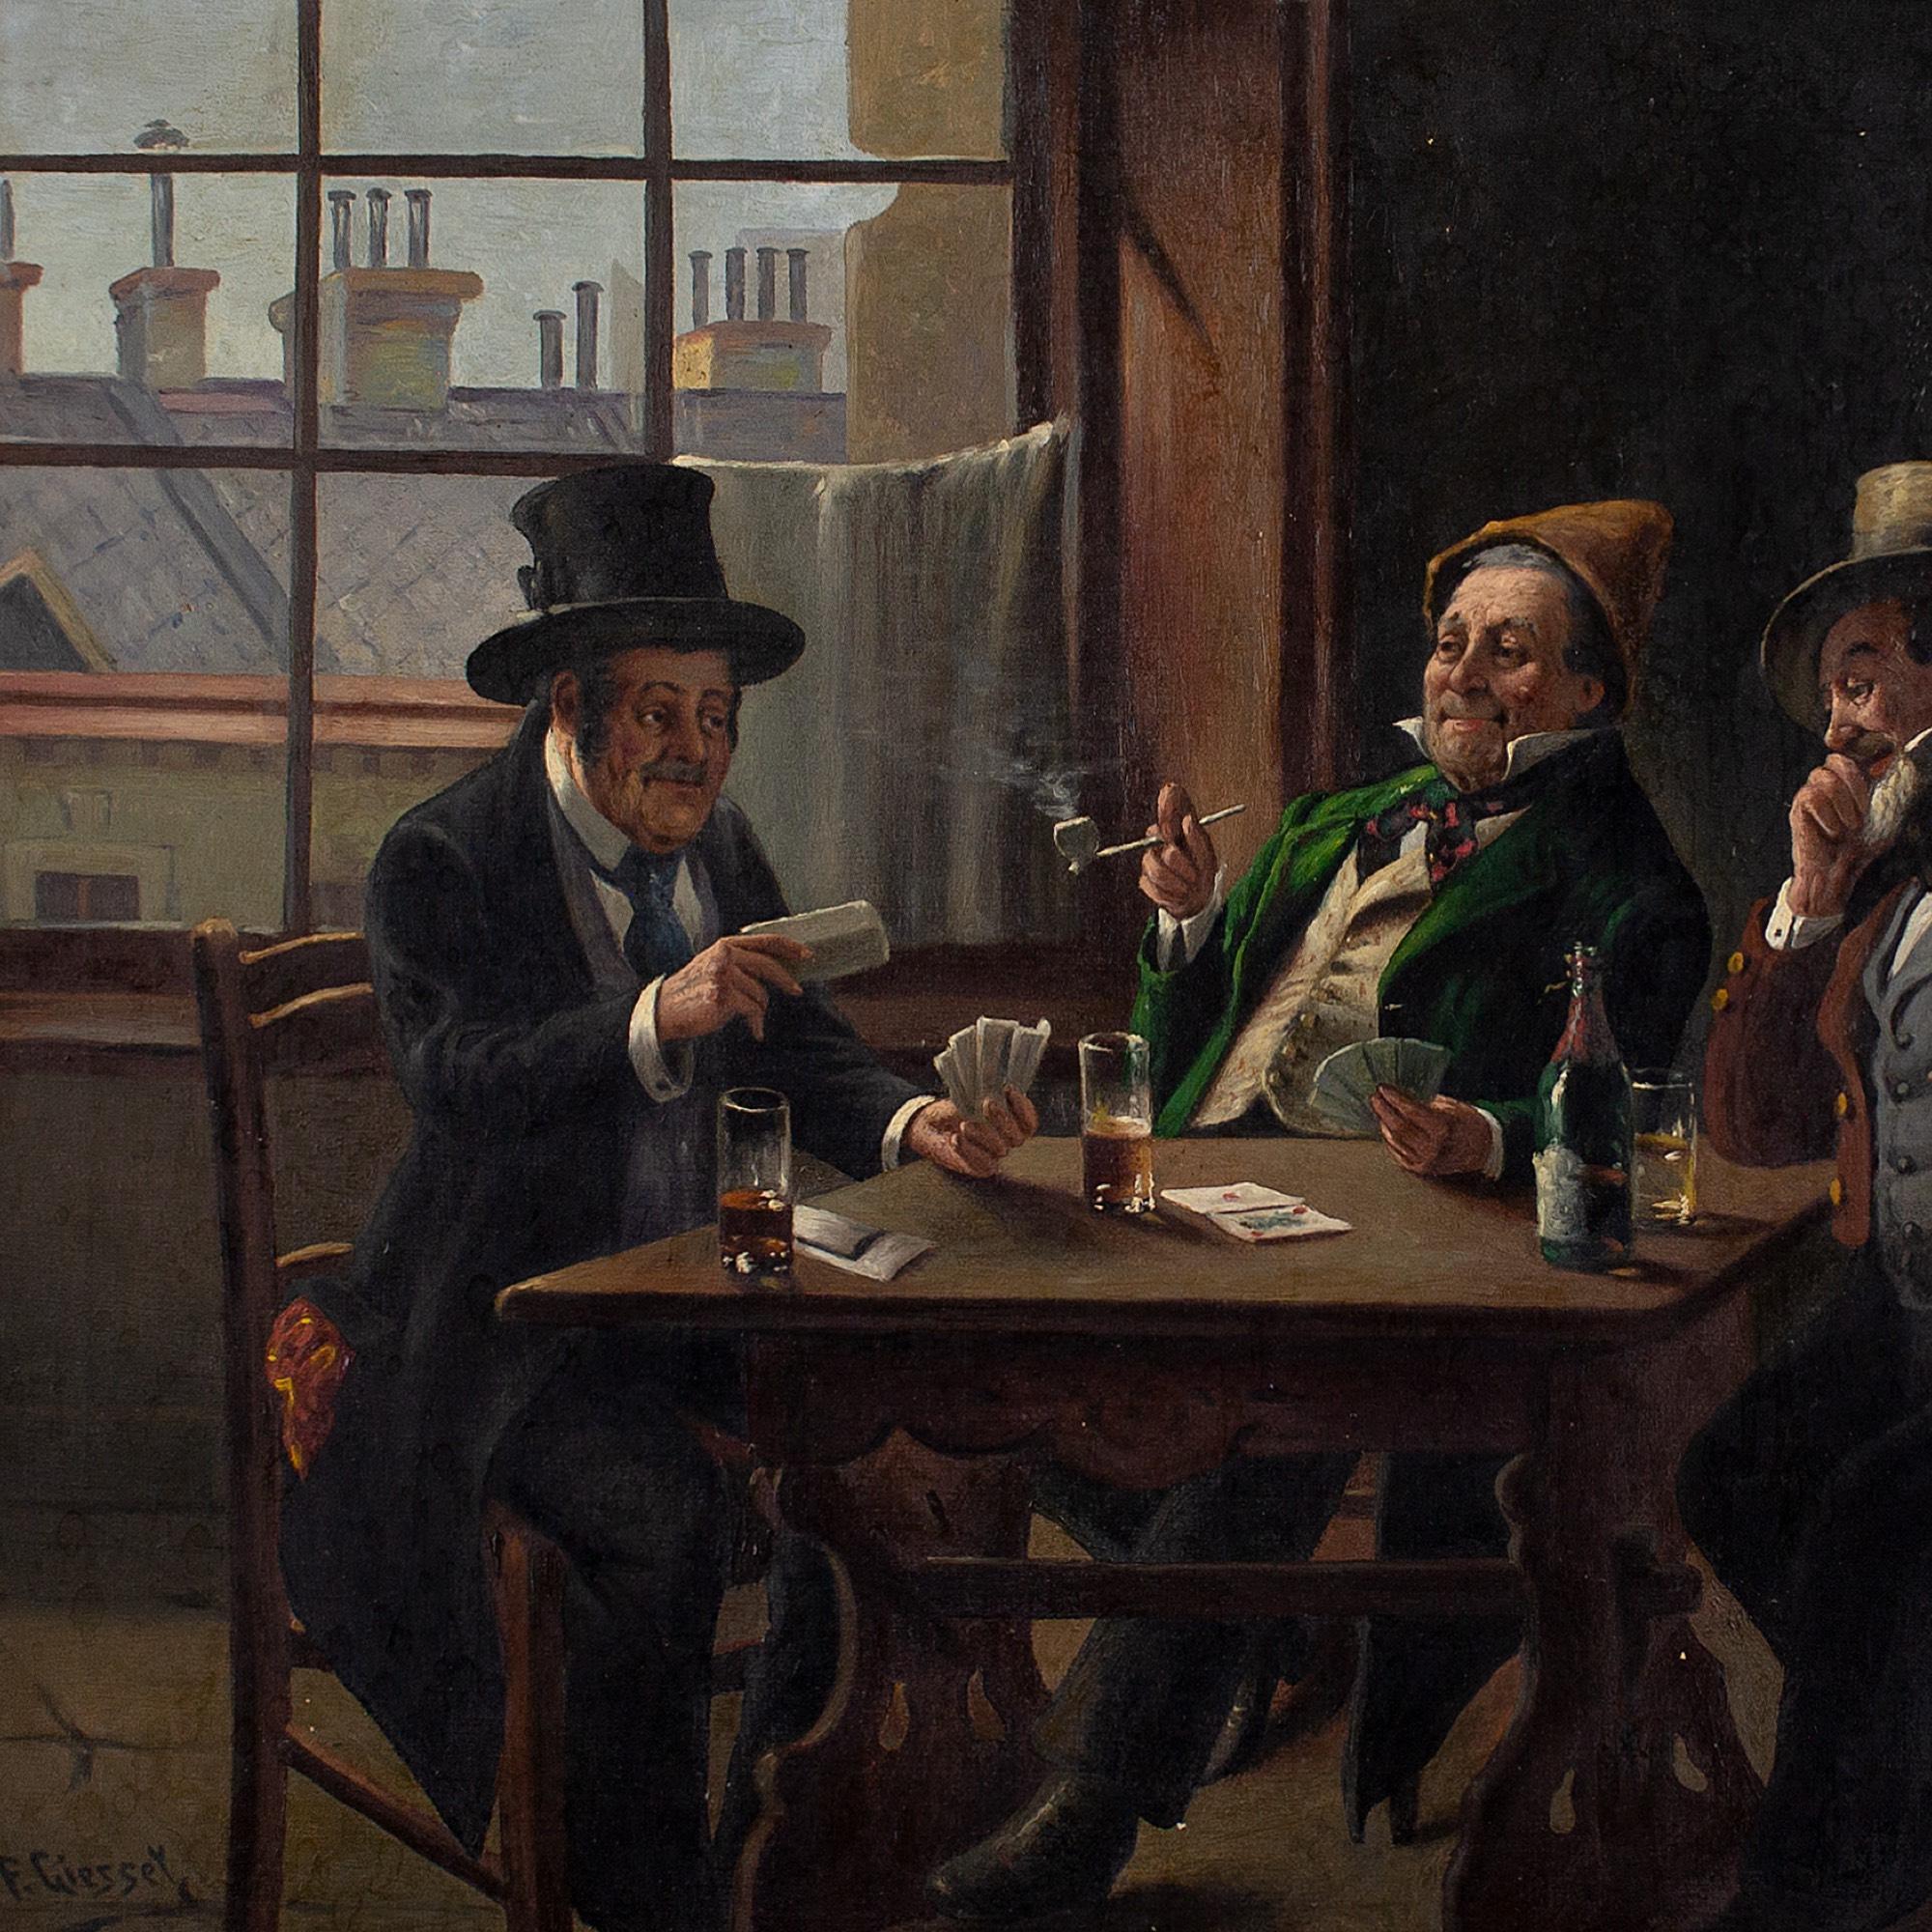 This fine early 20th-century genre scene by Austrian artist Franz Giessel (1902-1982) depicts three old friends playing cards at a tavern. On the right, a bearded gentleman rests one hand on his umbrella and looks across to another who is about to